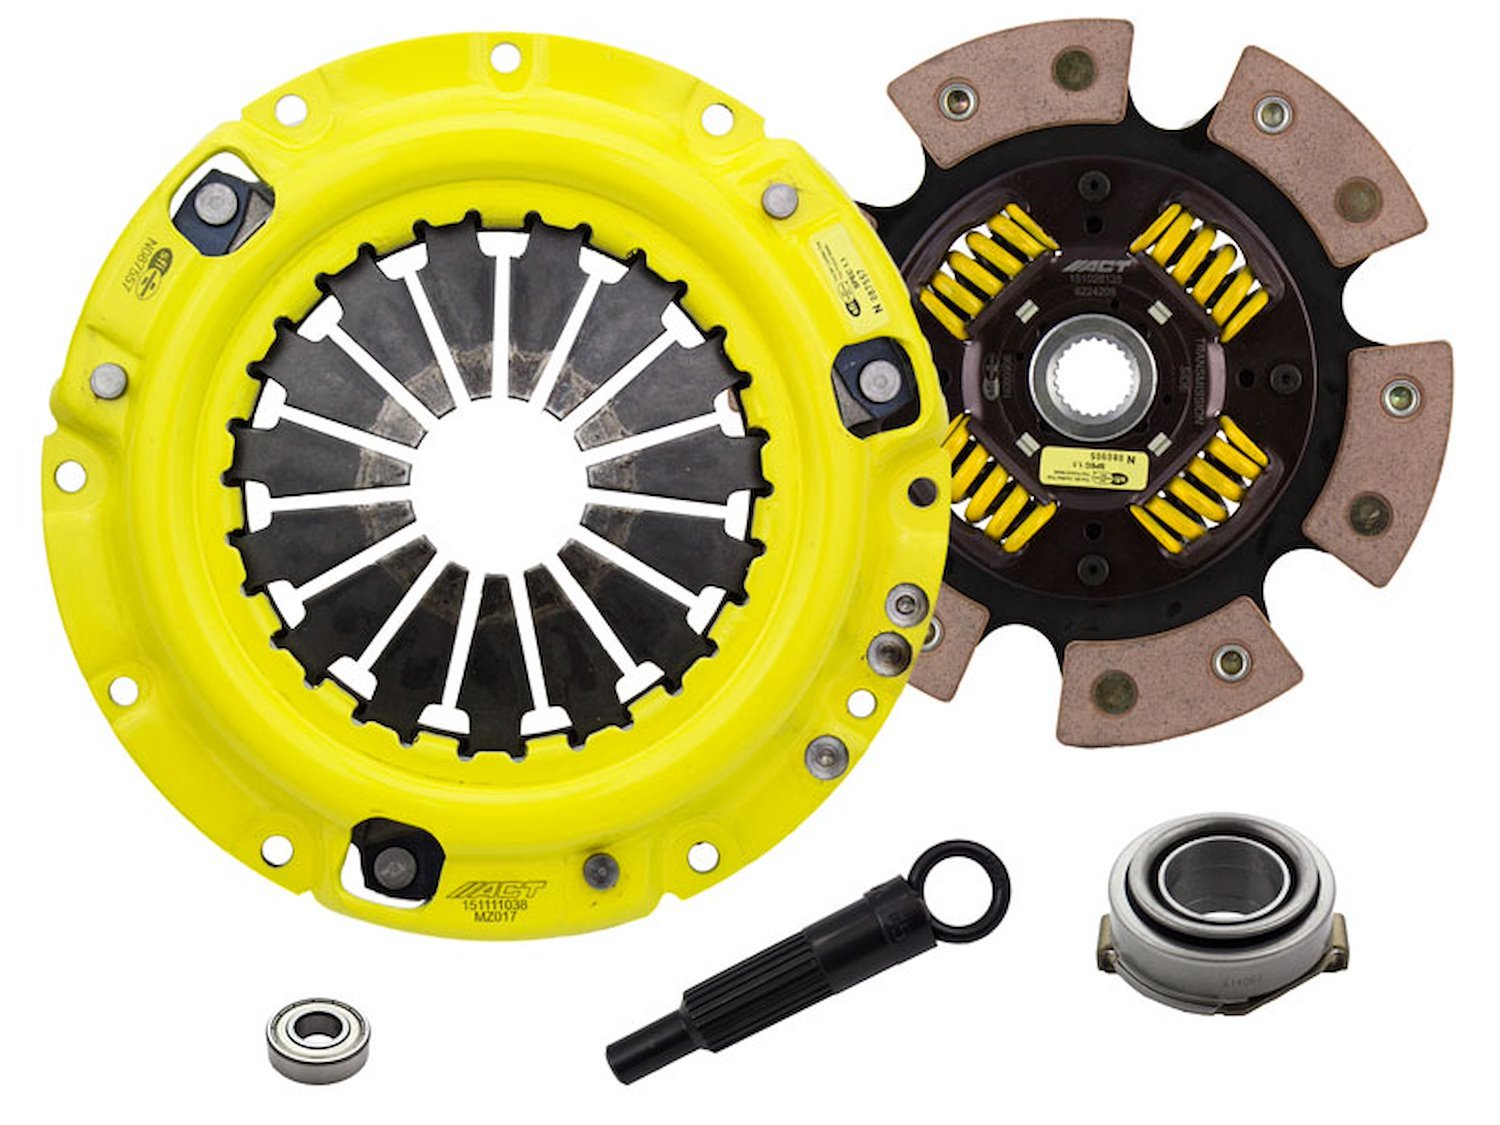 HD/Race Sprung 6-Pad Transmission Clutch Kit Fits Select Multiple Makes/Models